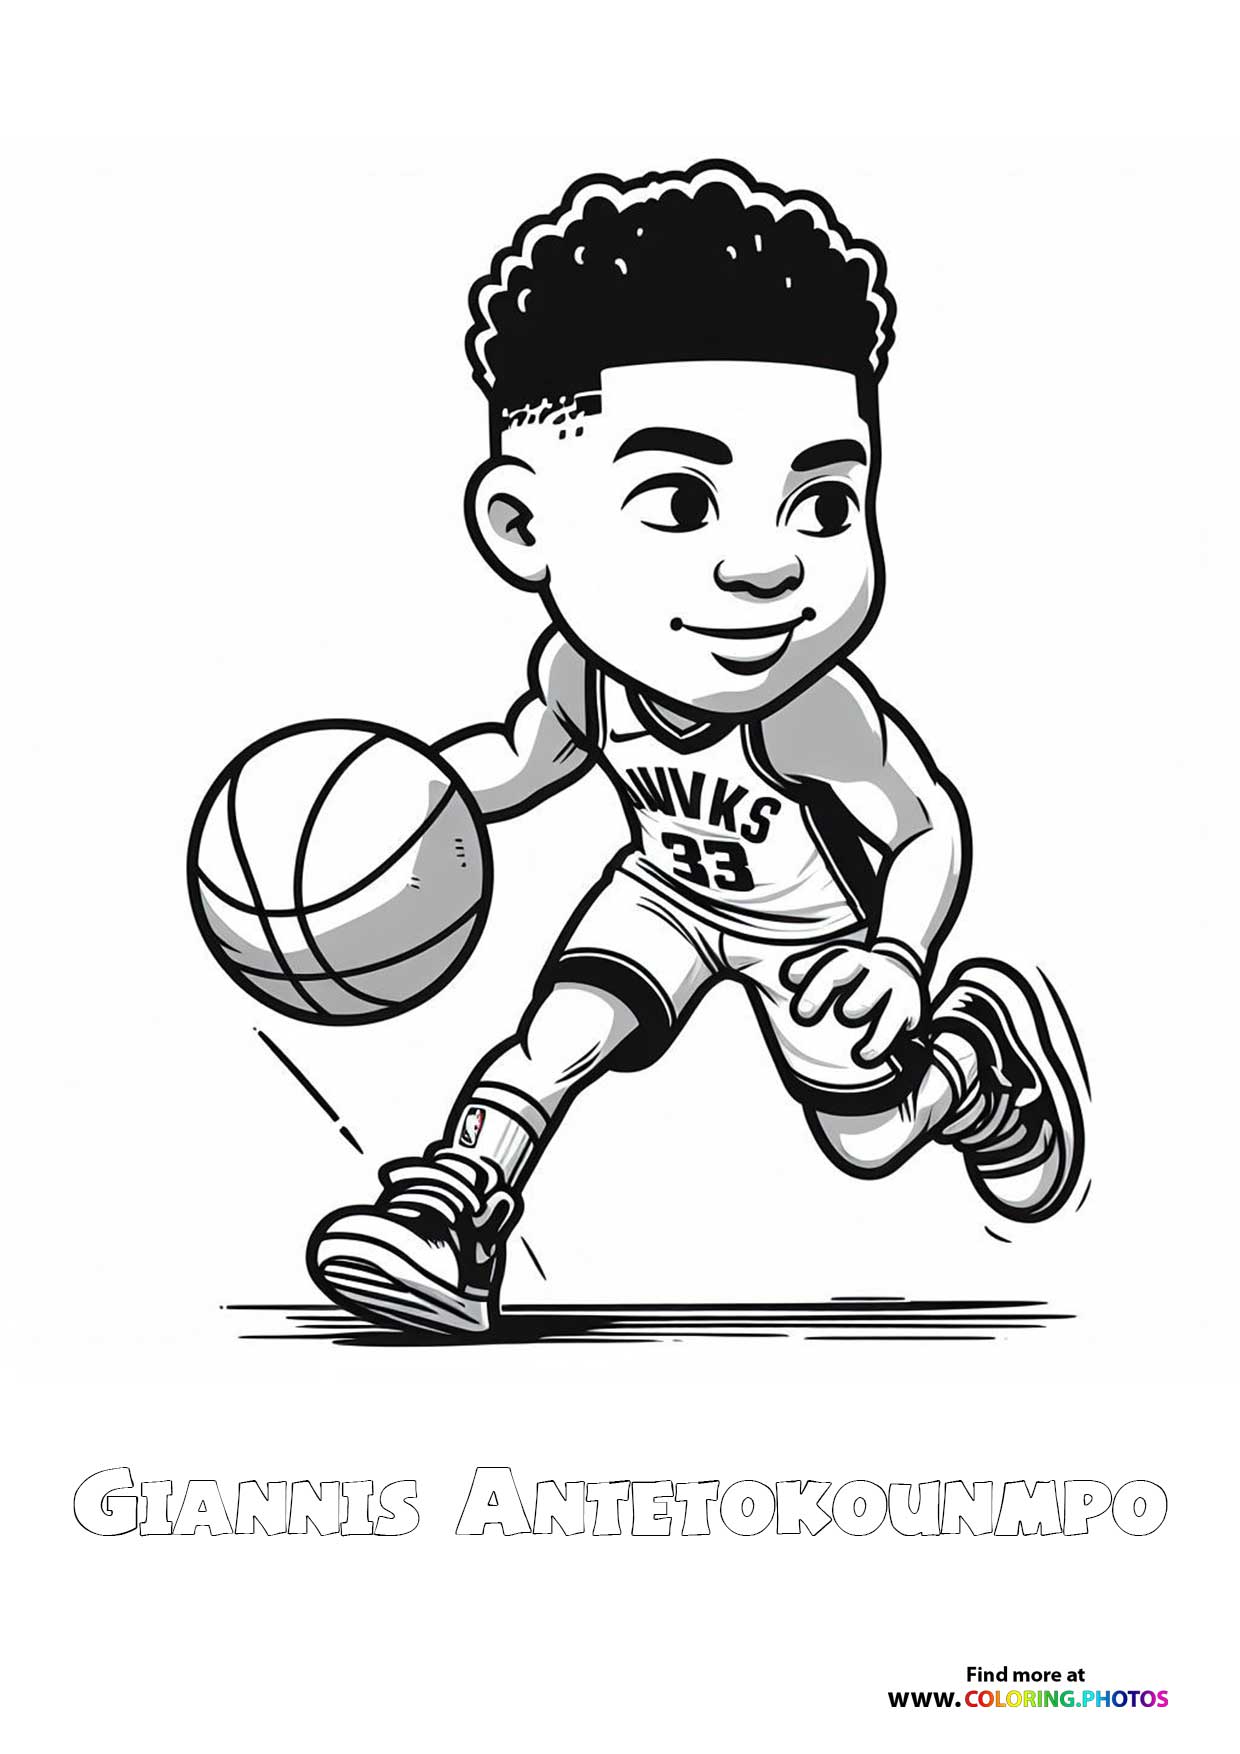 Little Giannis Antetokounmpo - Coloring Pages for kids